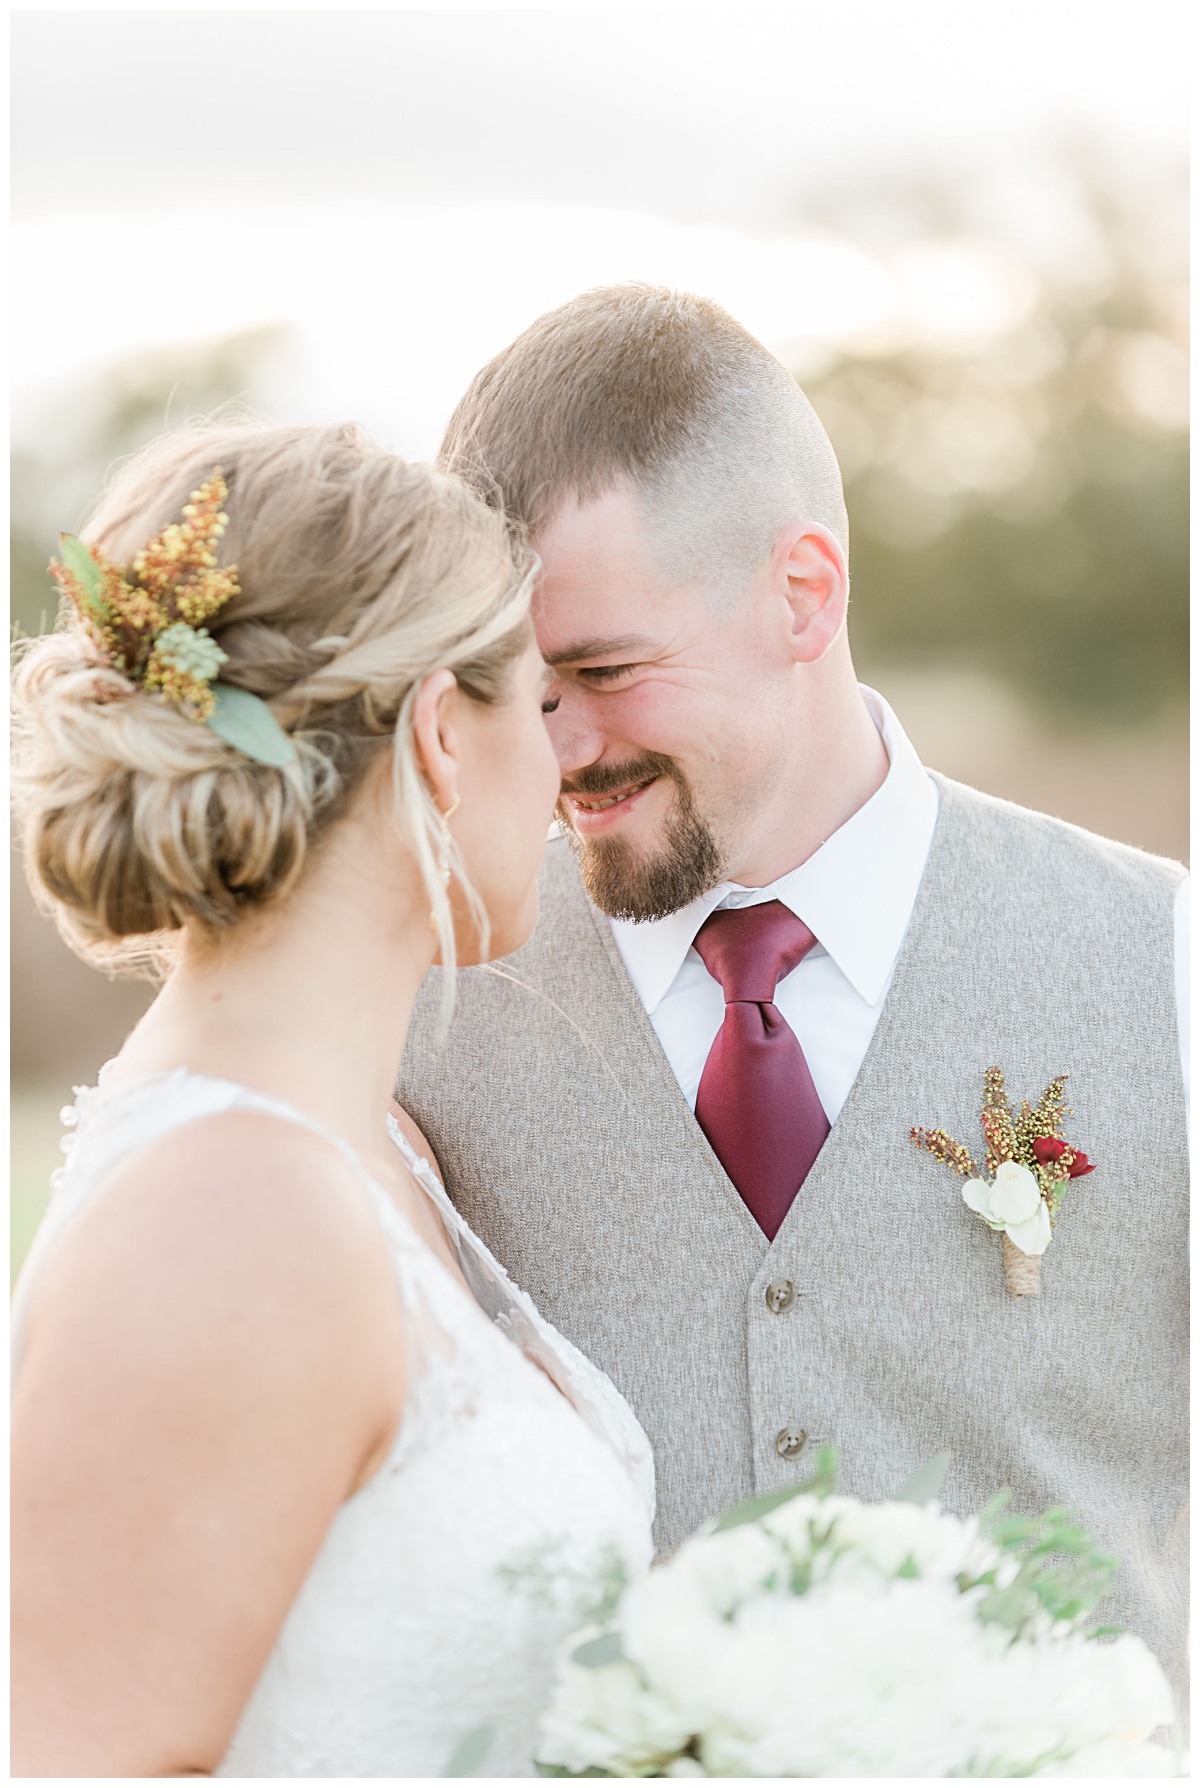 The couple after the outdoor wedding ceremony at Emery's Buffalo Creek | Fall Wedding Theme